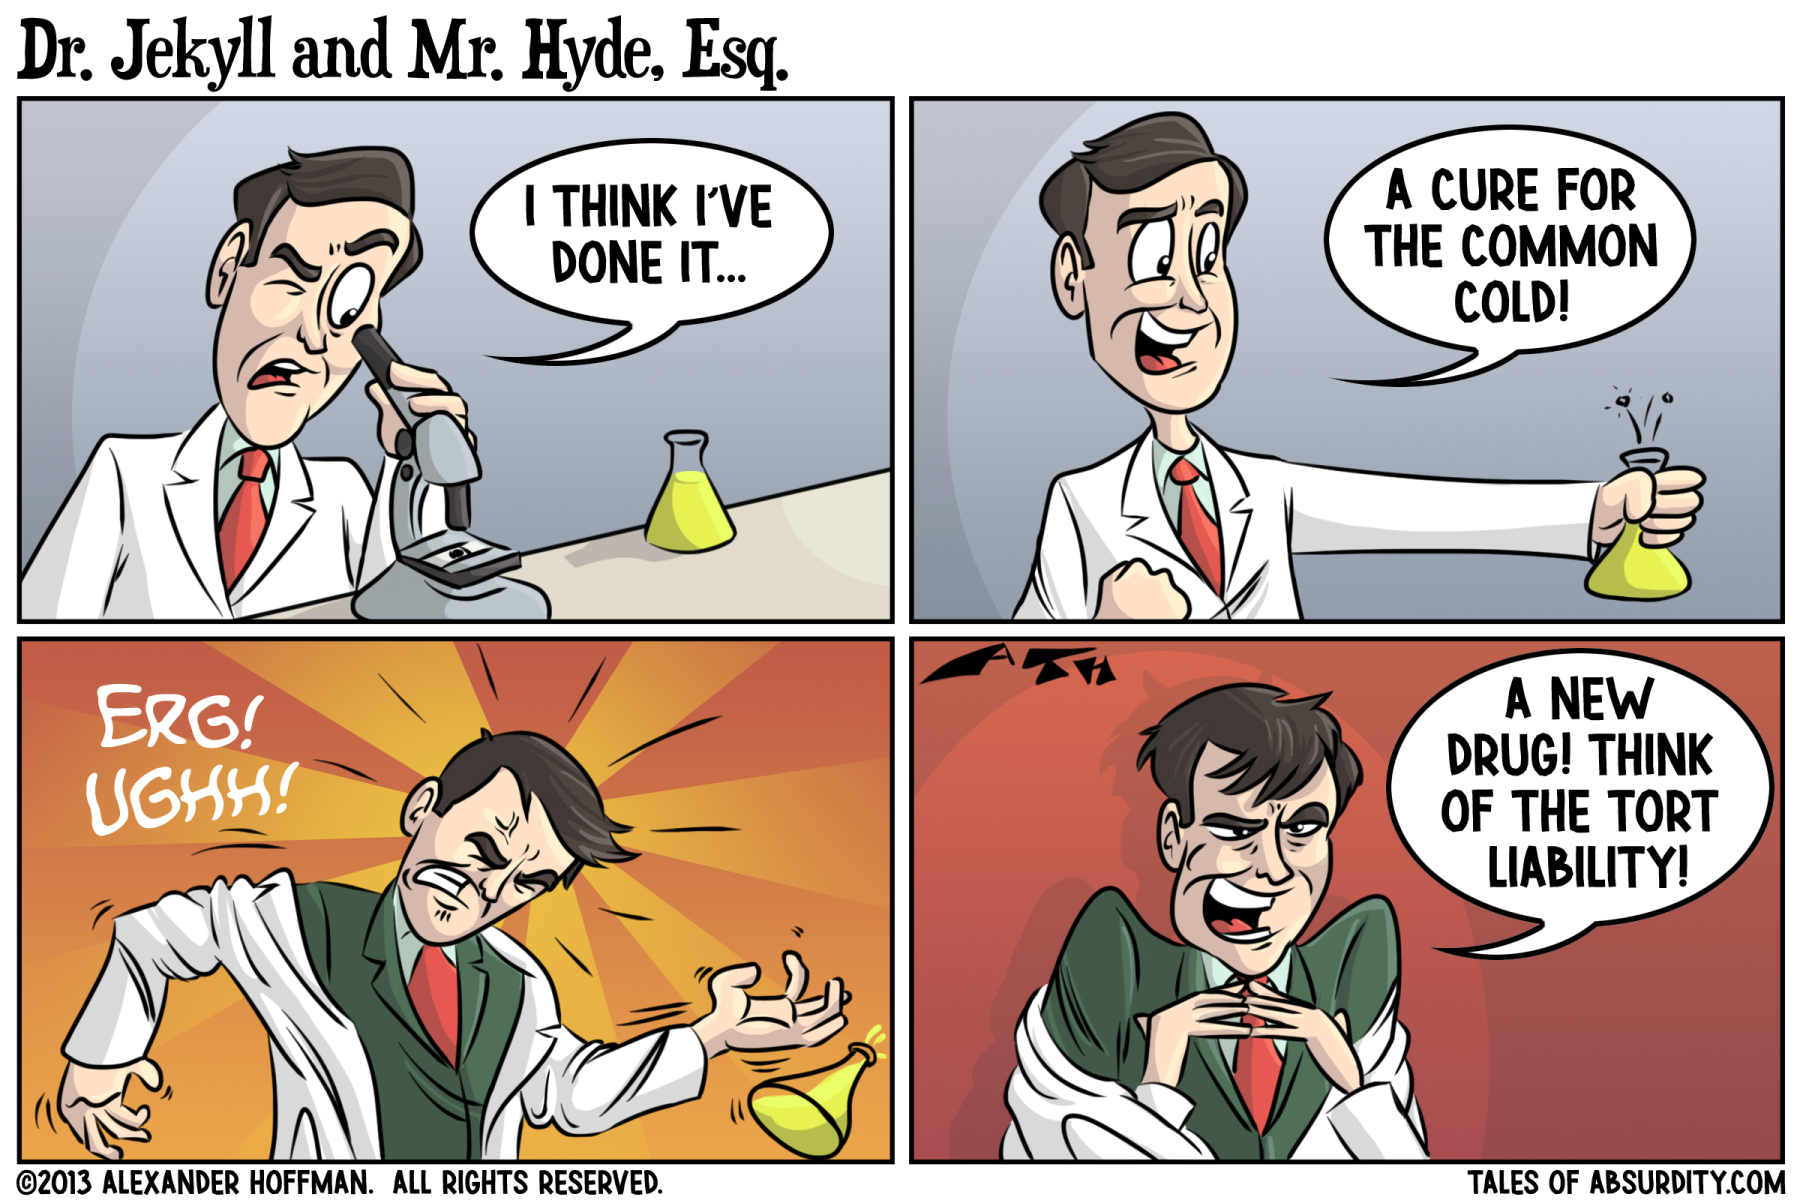 Dr. Jekyll and Mr. Hyde, Esq. – Tales of Absurdity